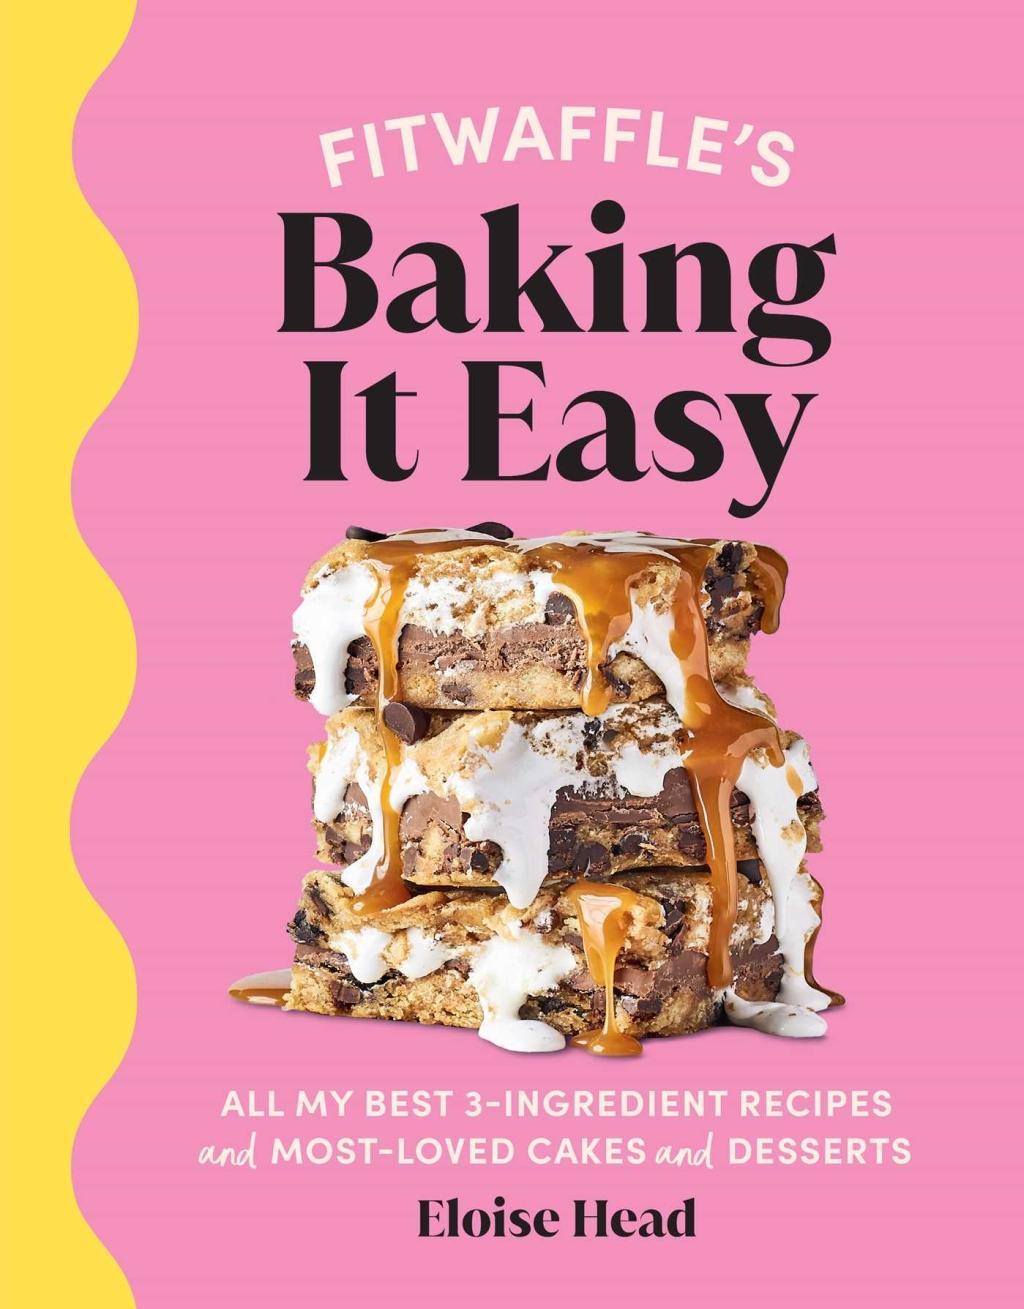 Книга Fitwaffle's Baking It Easy: All My Best 3-Ingredient Recipes and Most-Loved Sweets and Desserts (Easy Baking Recipes, Dessert Recipes, Simple Baki 